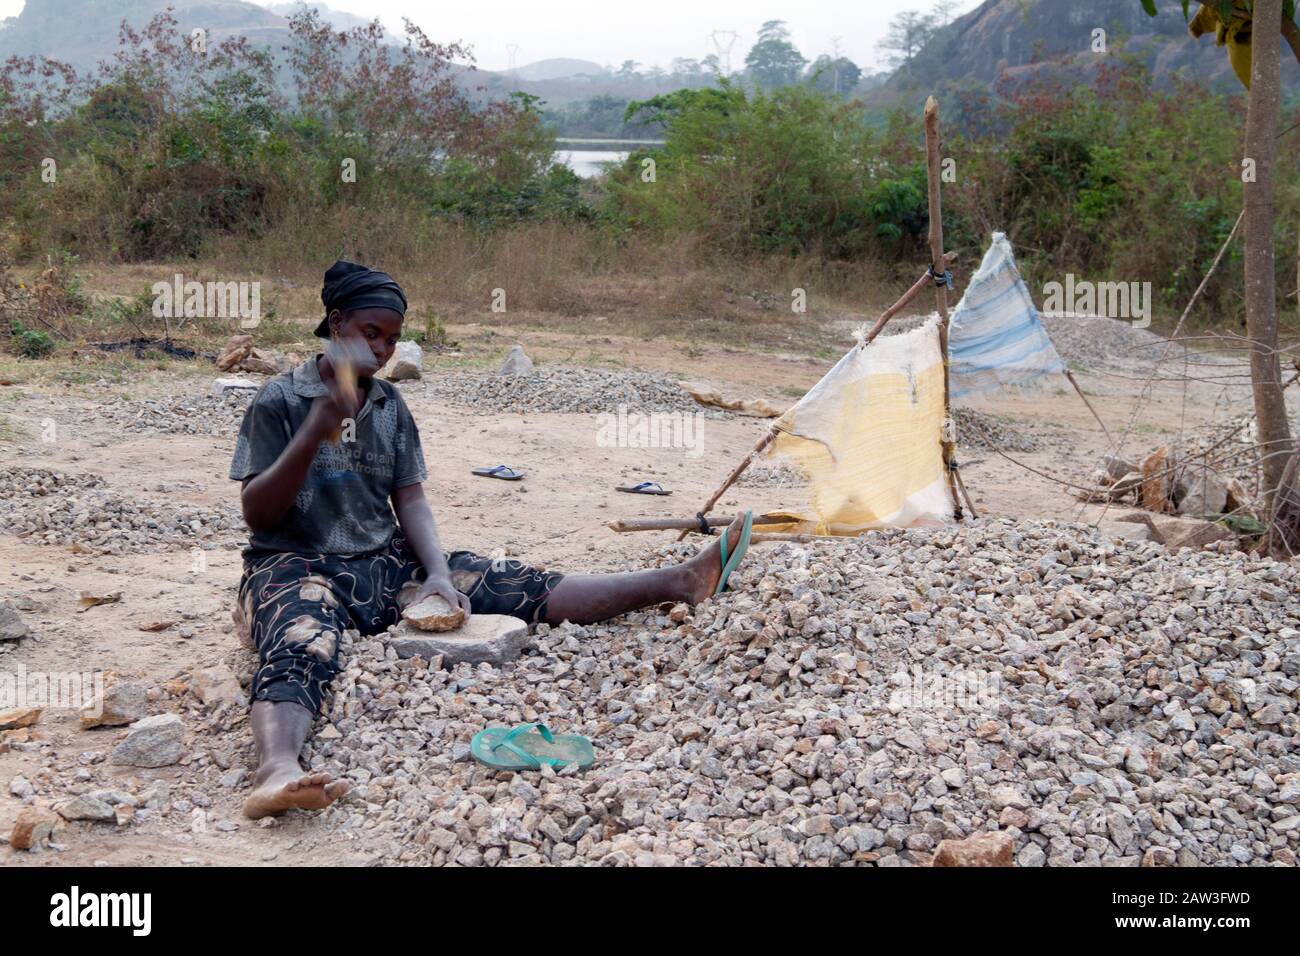 Adolescents crushing stones in a stone quarry near Duékoué in Ivory Coast ,Africa Stock Photo